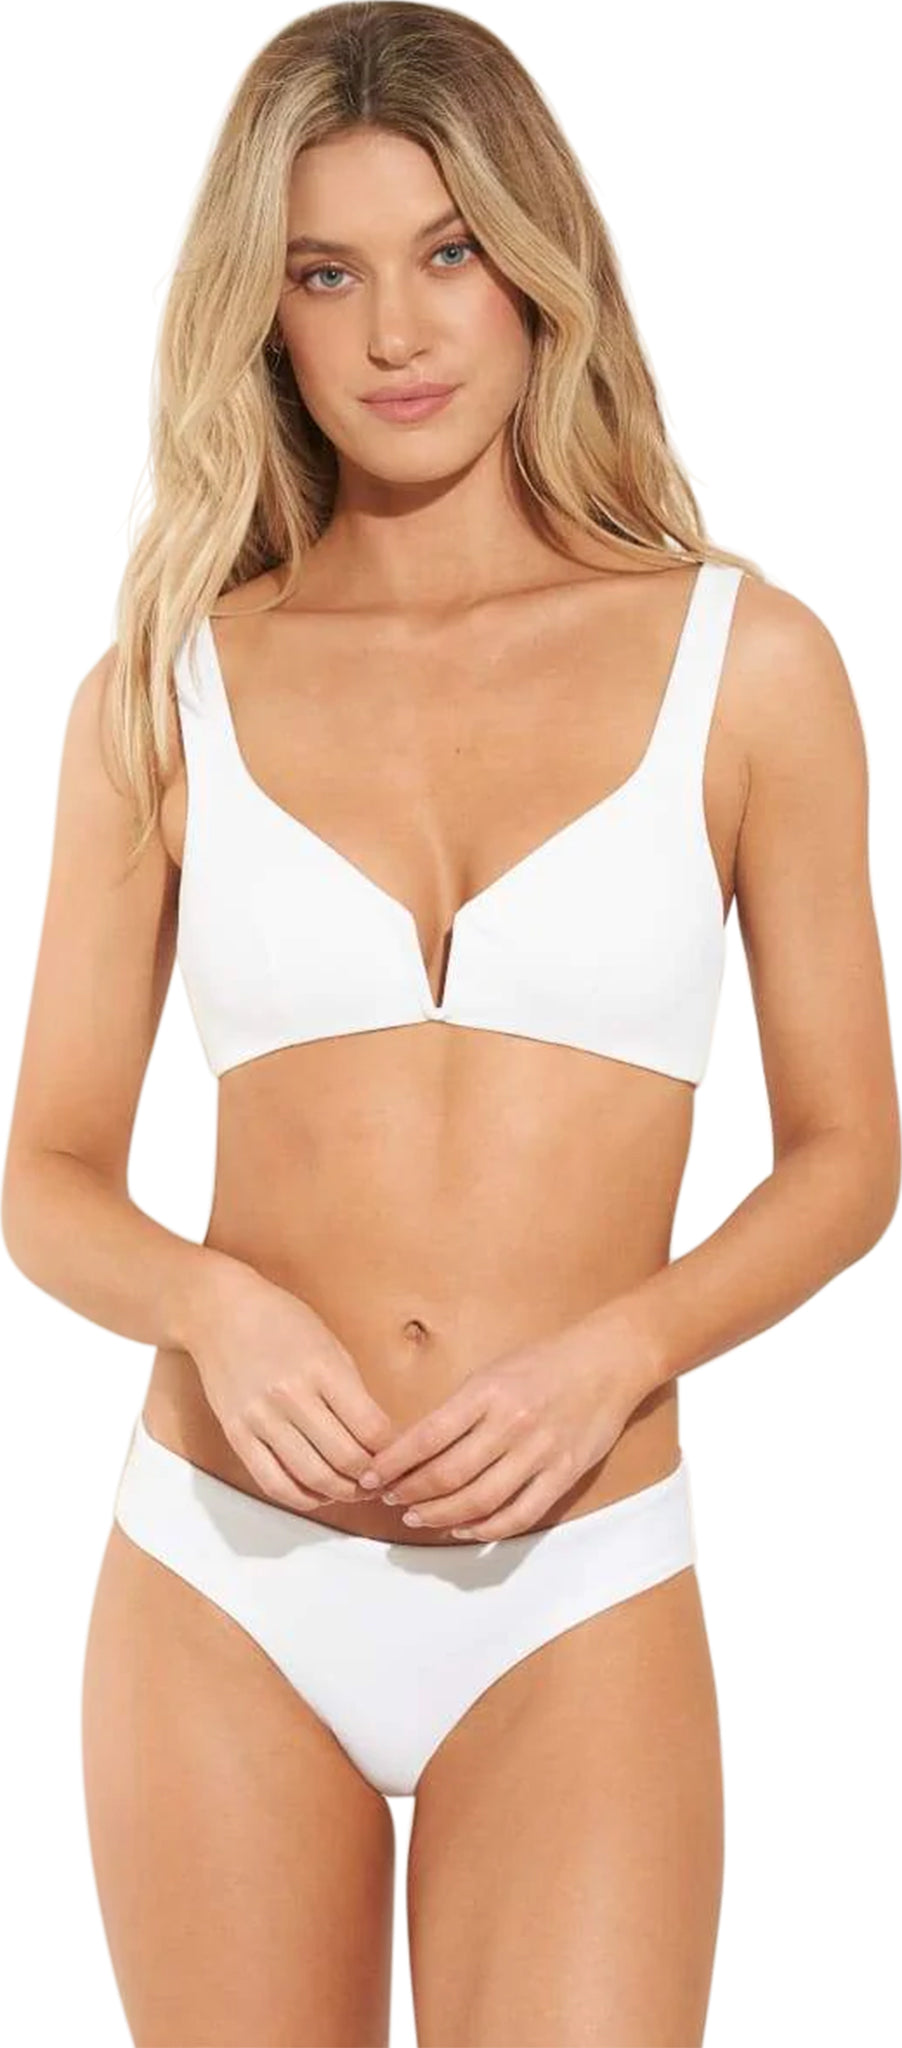 Buy 40A White Bralette, Bra With Hook and Loop Back Closure